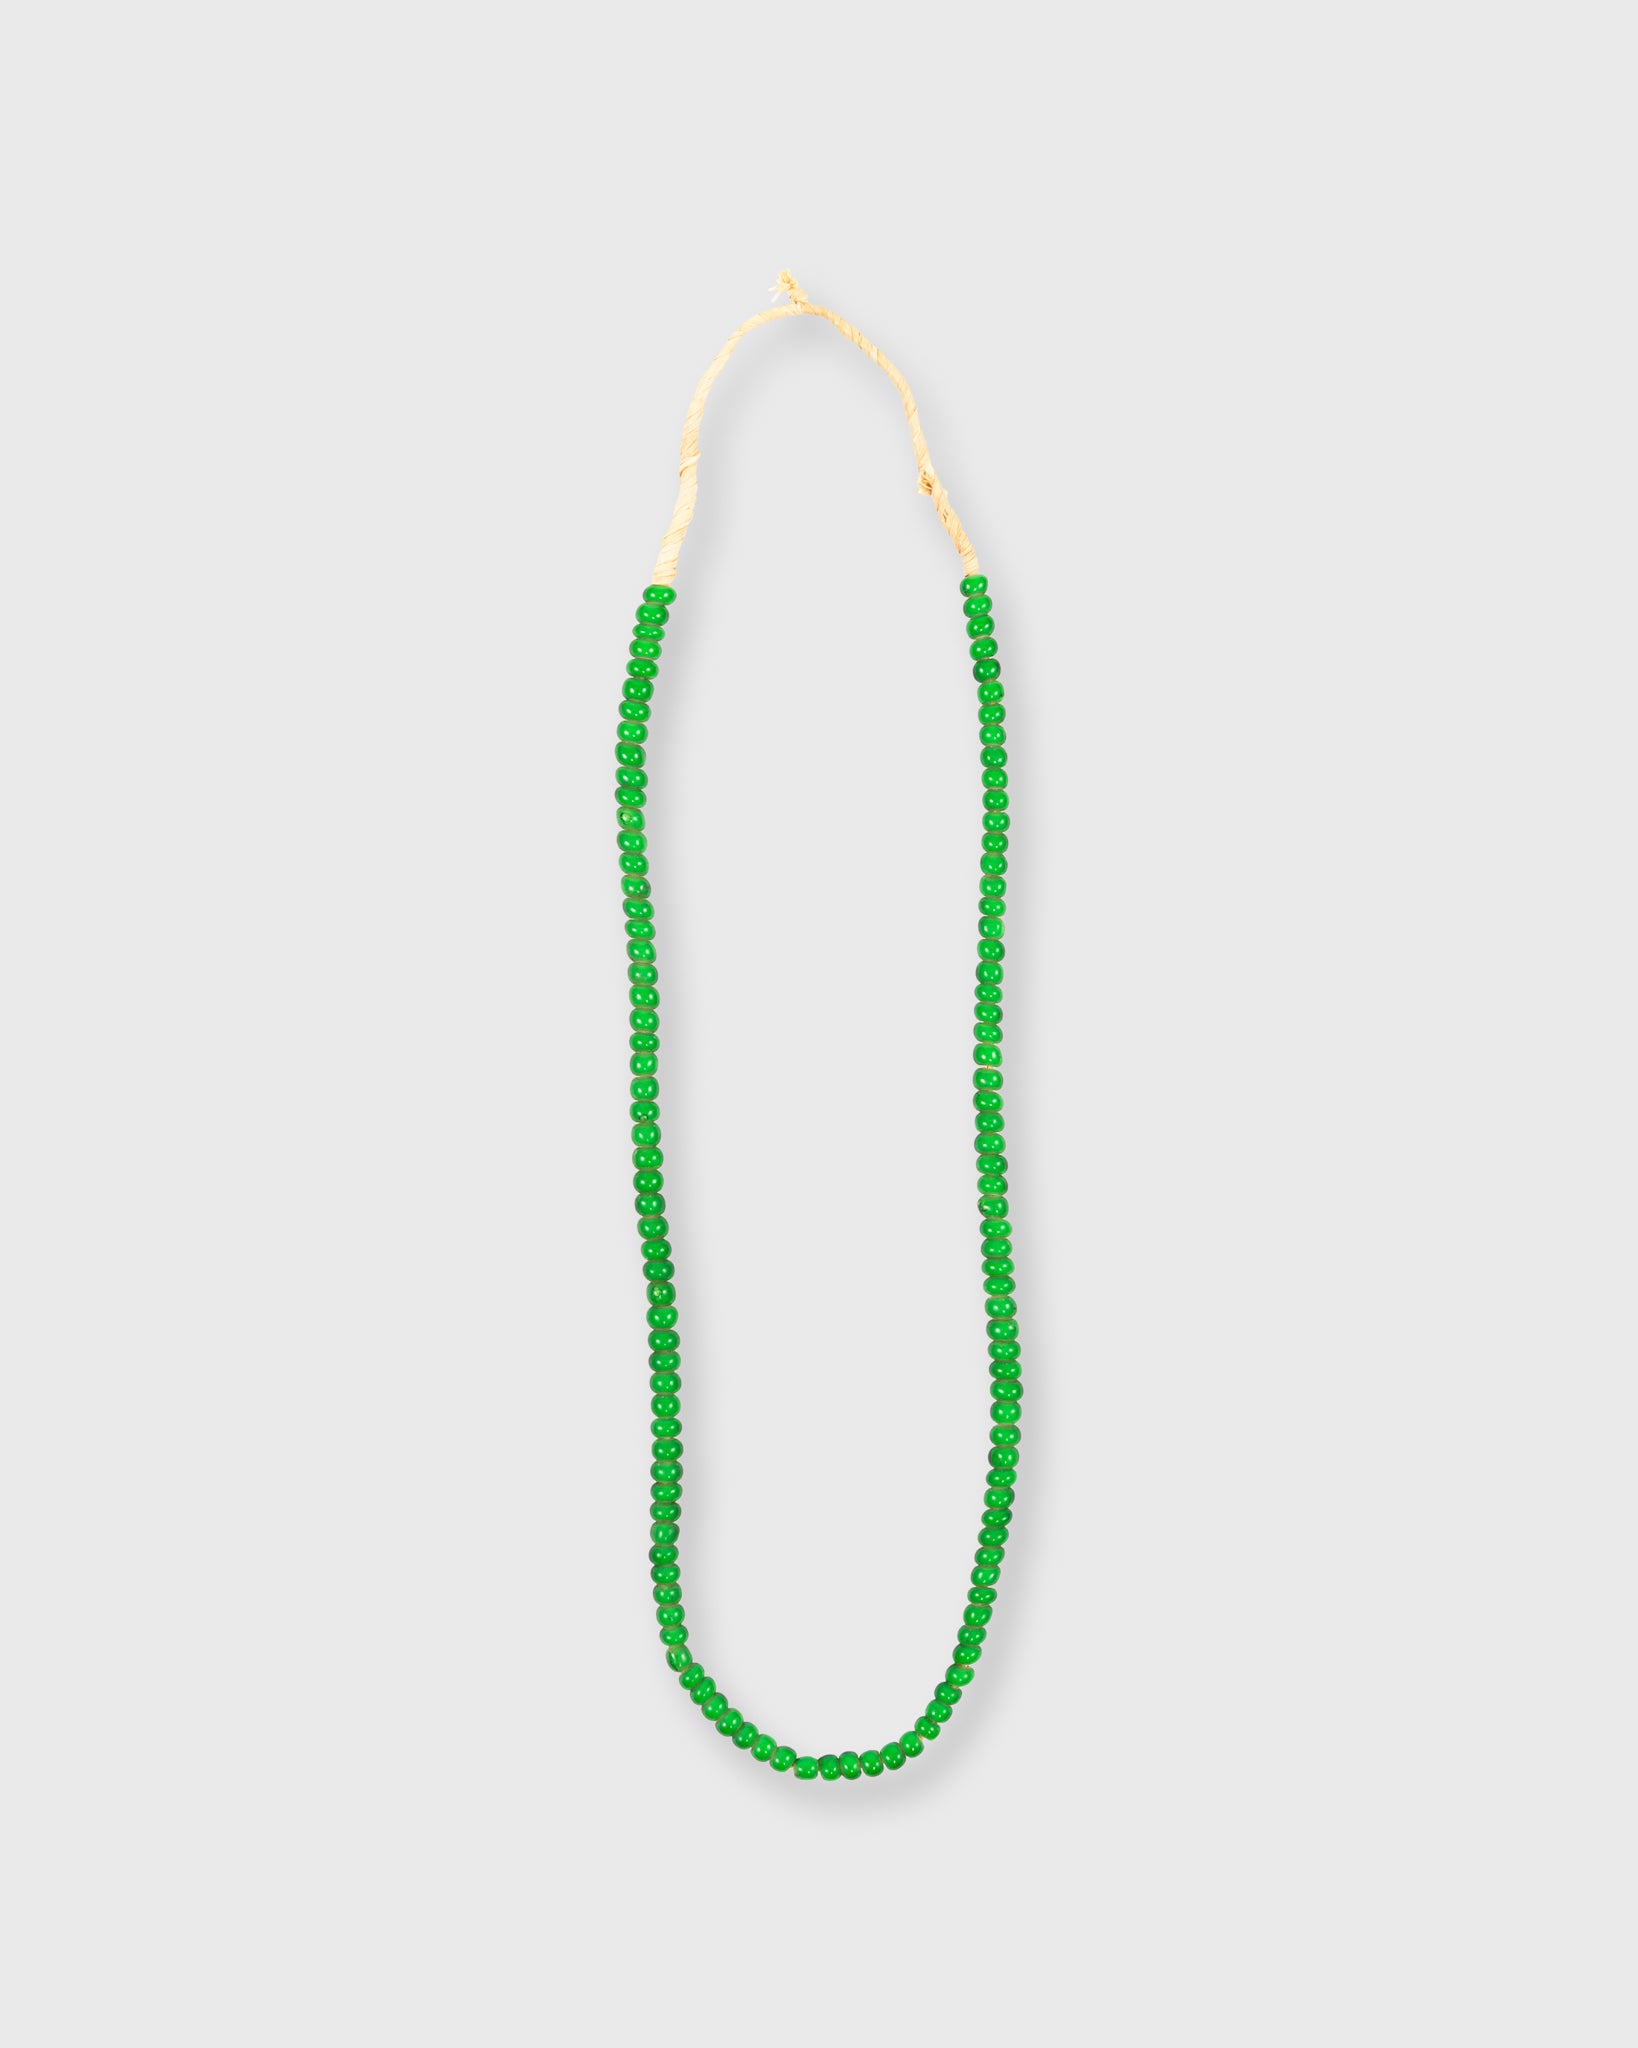 Small African Beads Green Whiteheart